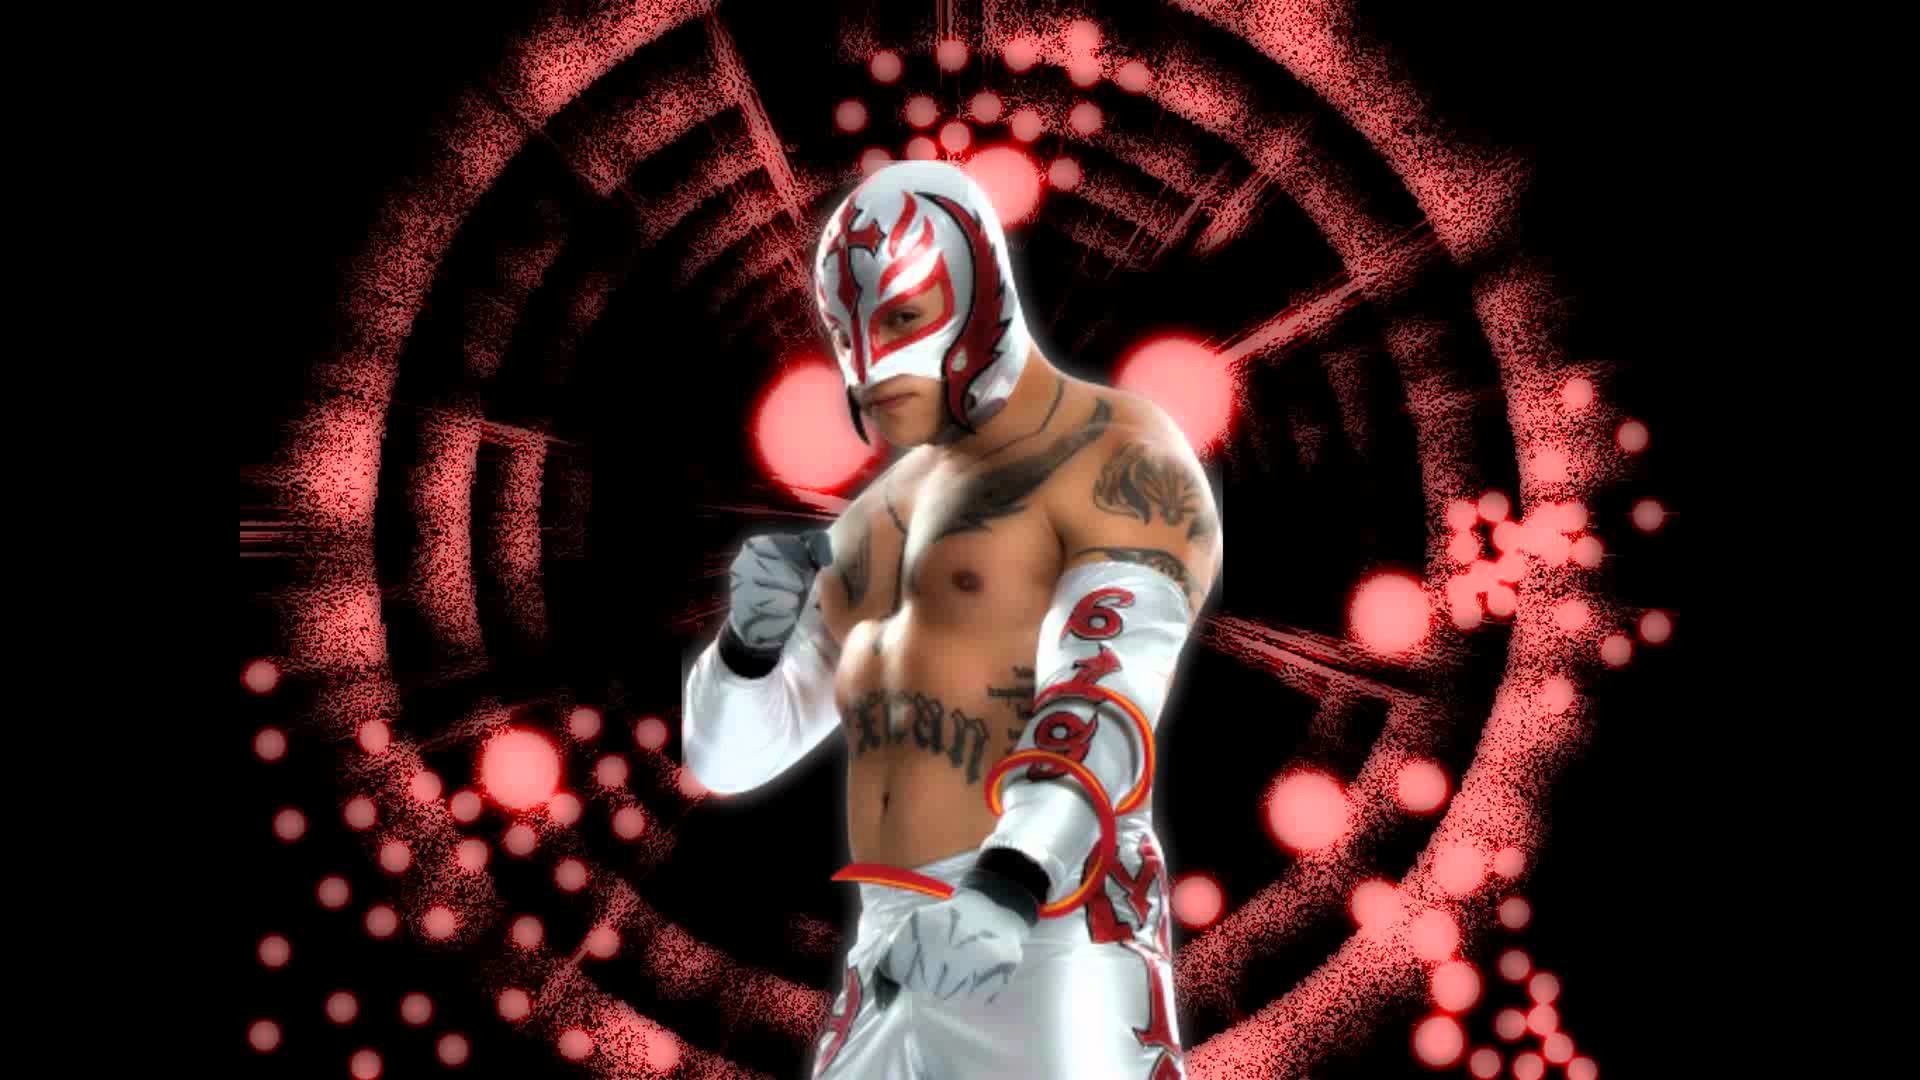 1920x1080 Rey Mysterio 6th WWE Theme Song [HD + Download]